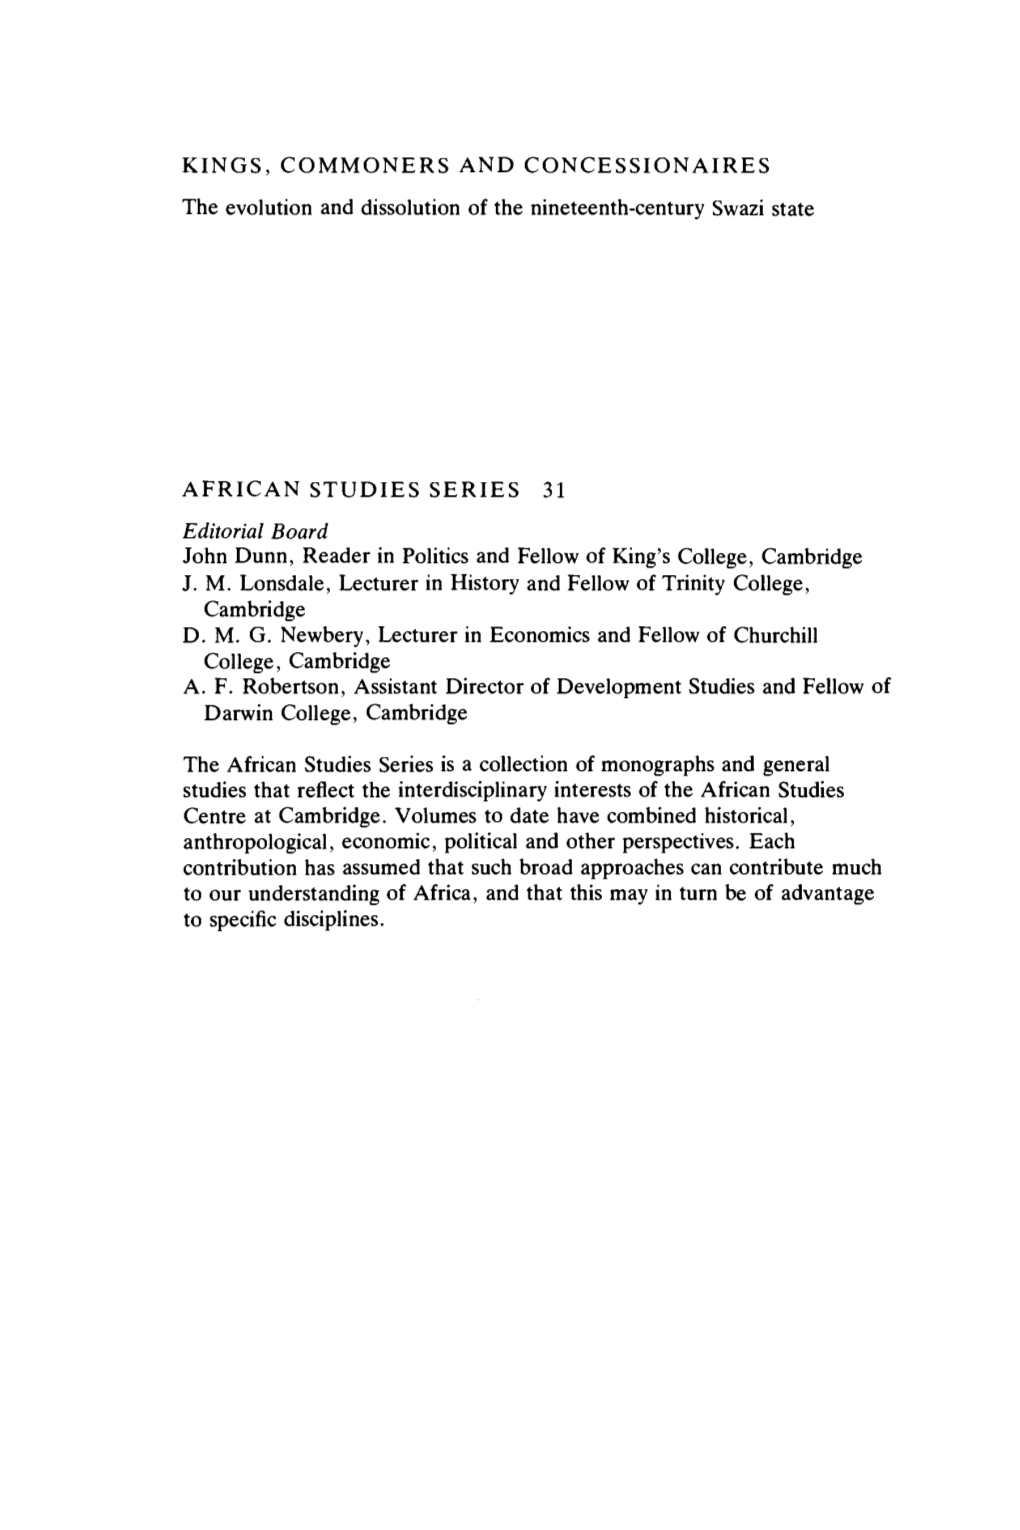 KINGS, COMMONERS and CONCESSIONAIRES the Evolution and Dissolution of the Nineteenth-Century Swazi State AFRICAN STUDIES SERIES